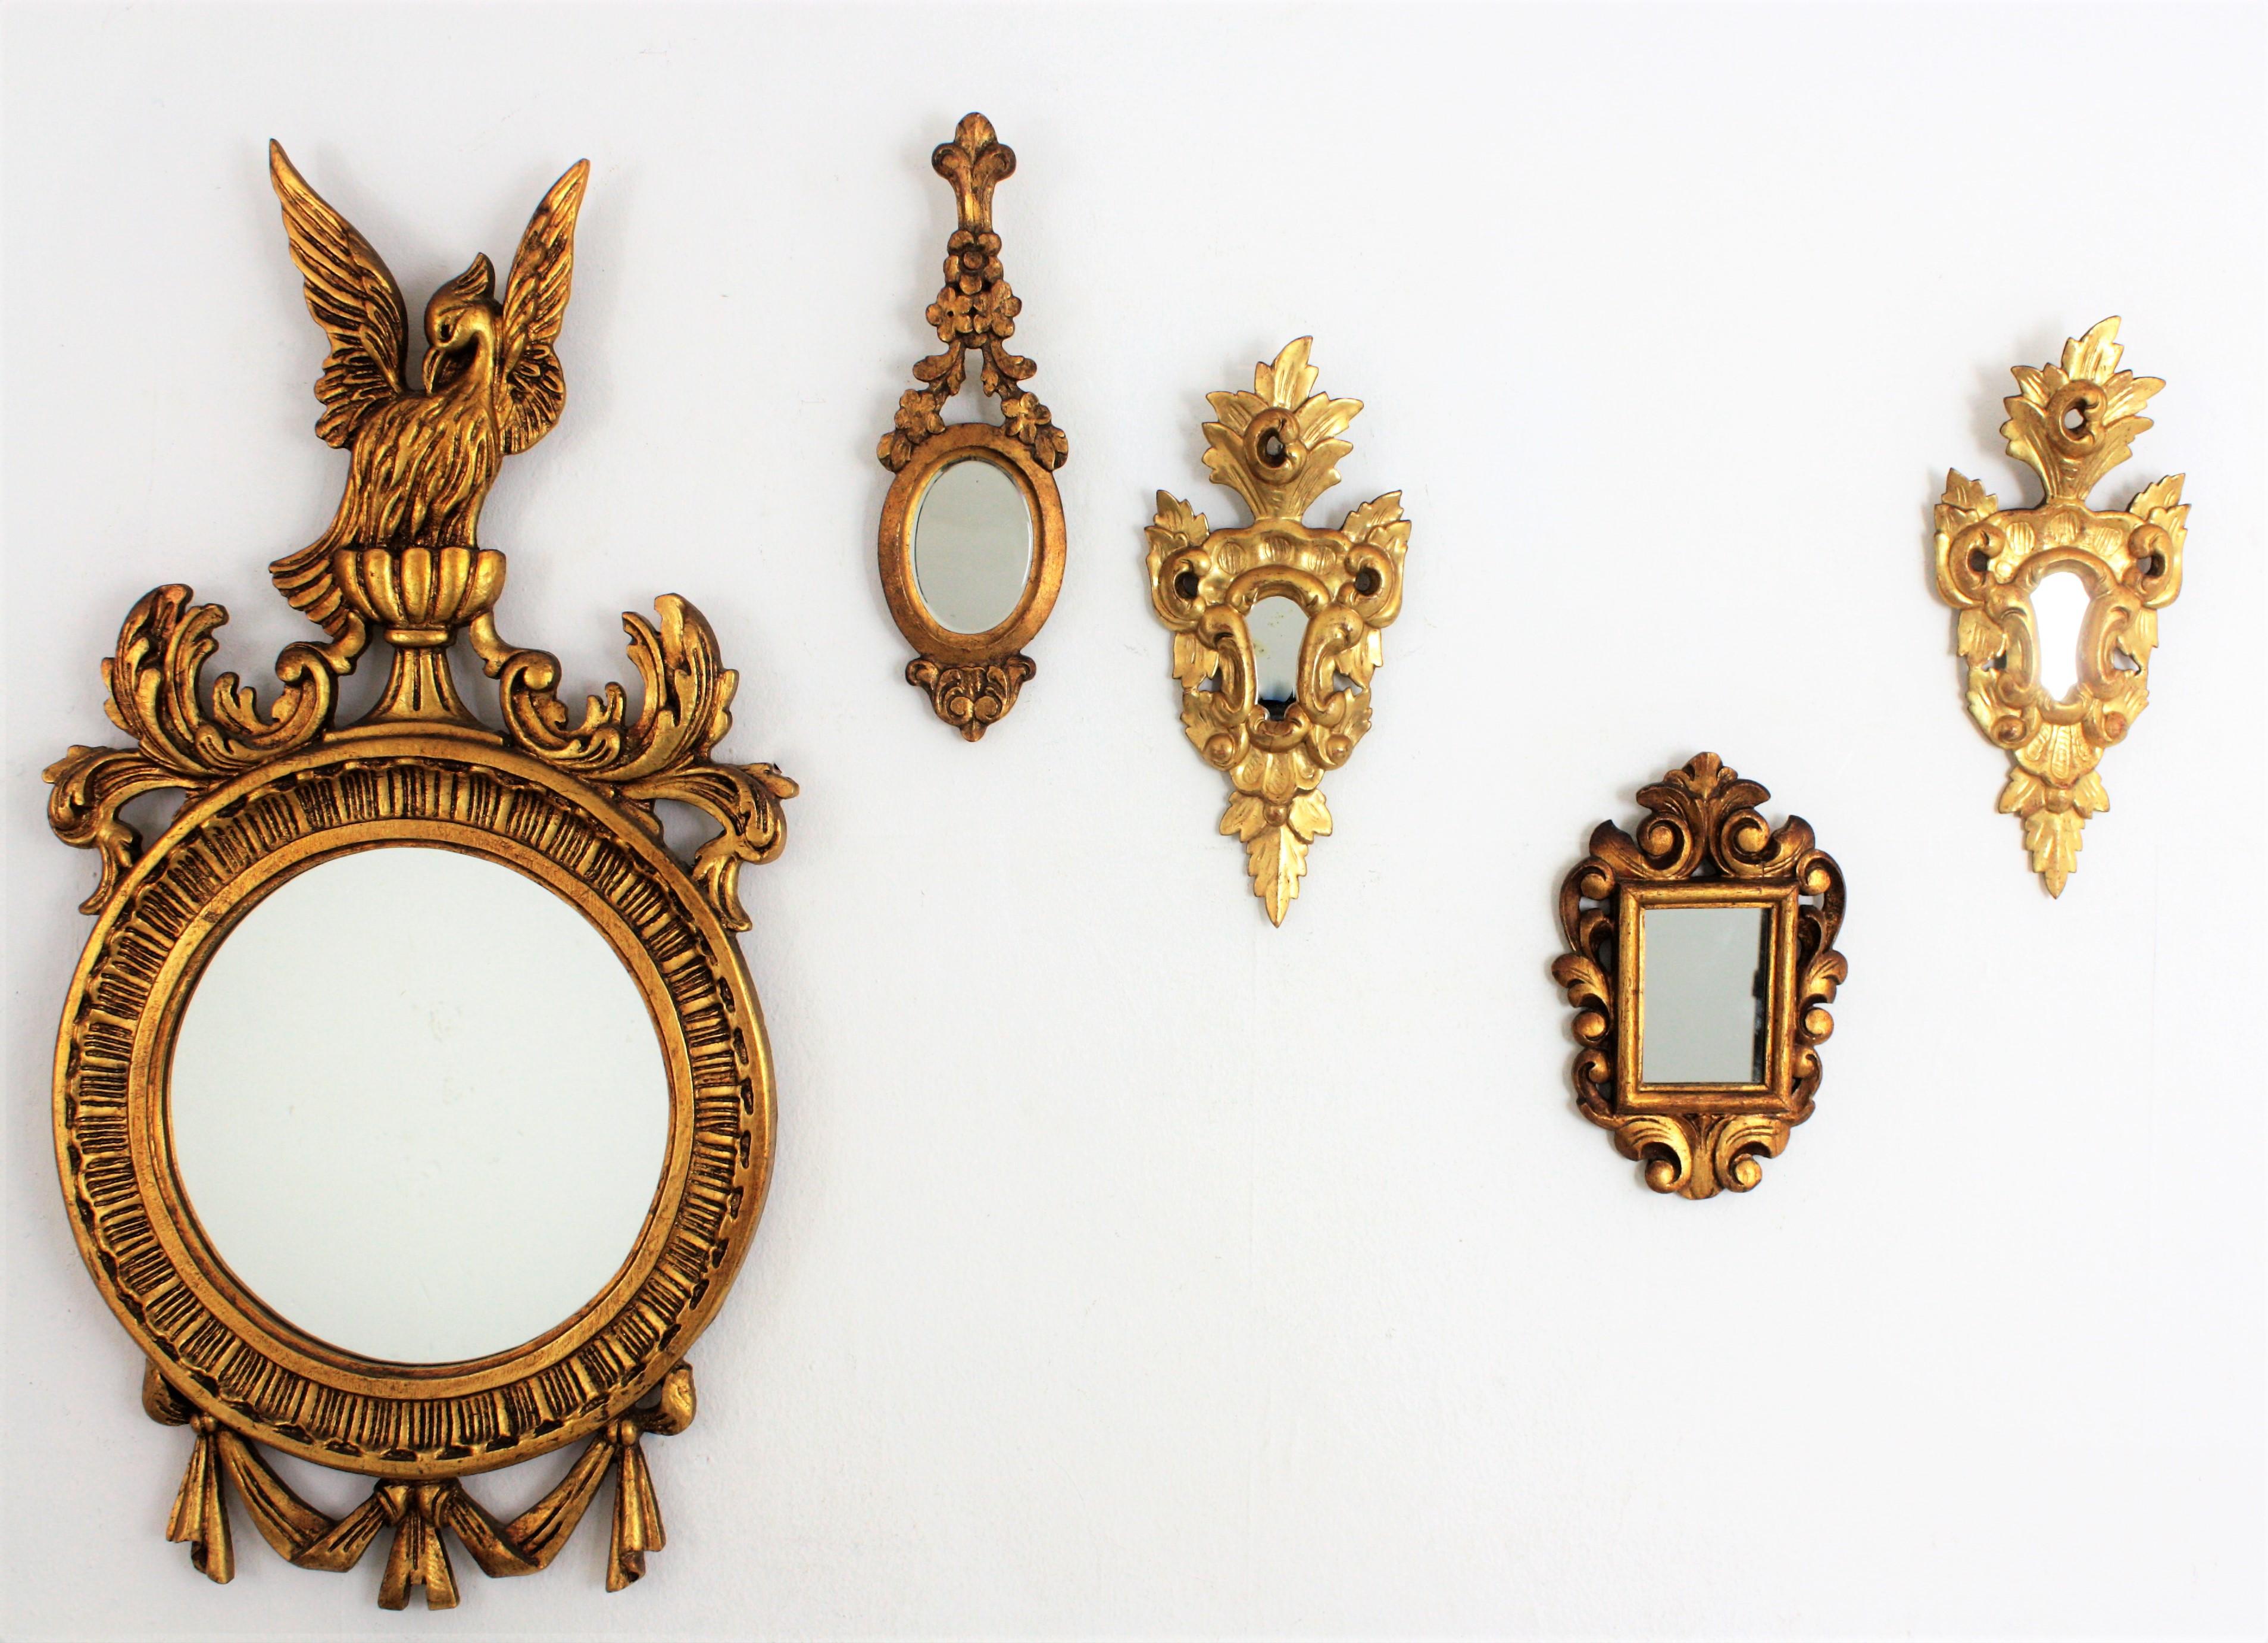 Beautiful carved wood small mirror finished with scroll decorations at the frame and gold leaf. It has been restored to preserve its original antique patina. Interesting for collectors and beautiful placed with other miniature mirrors creating a